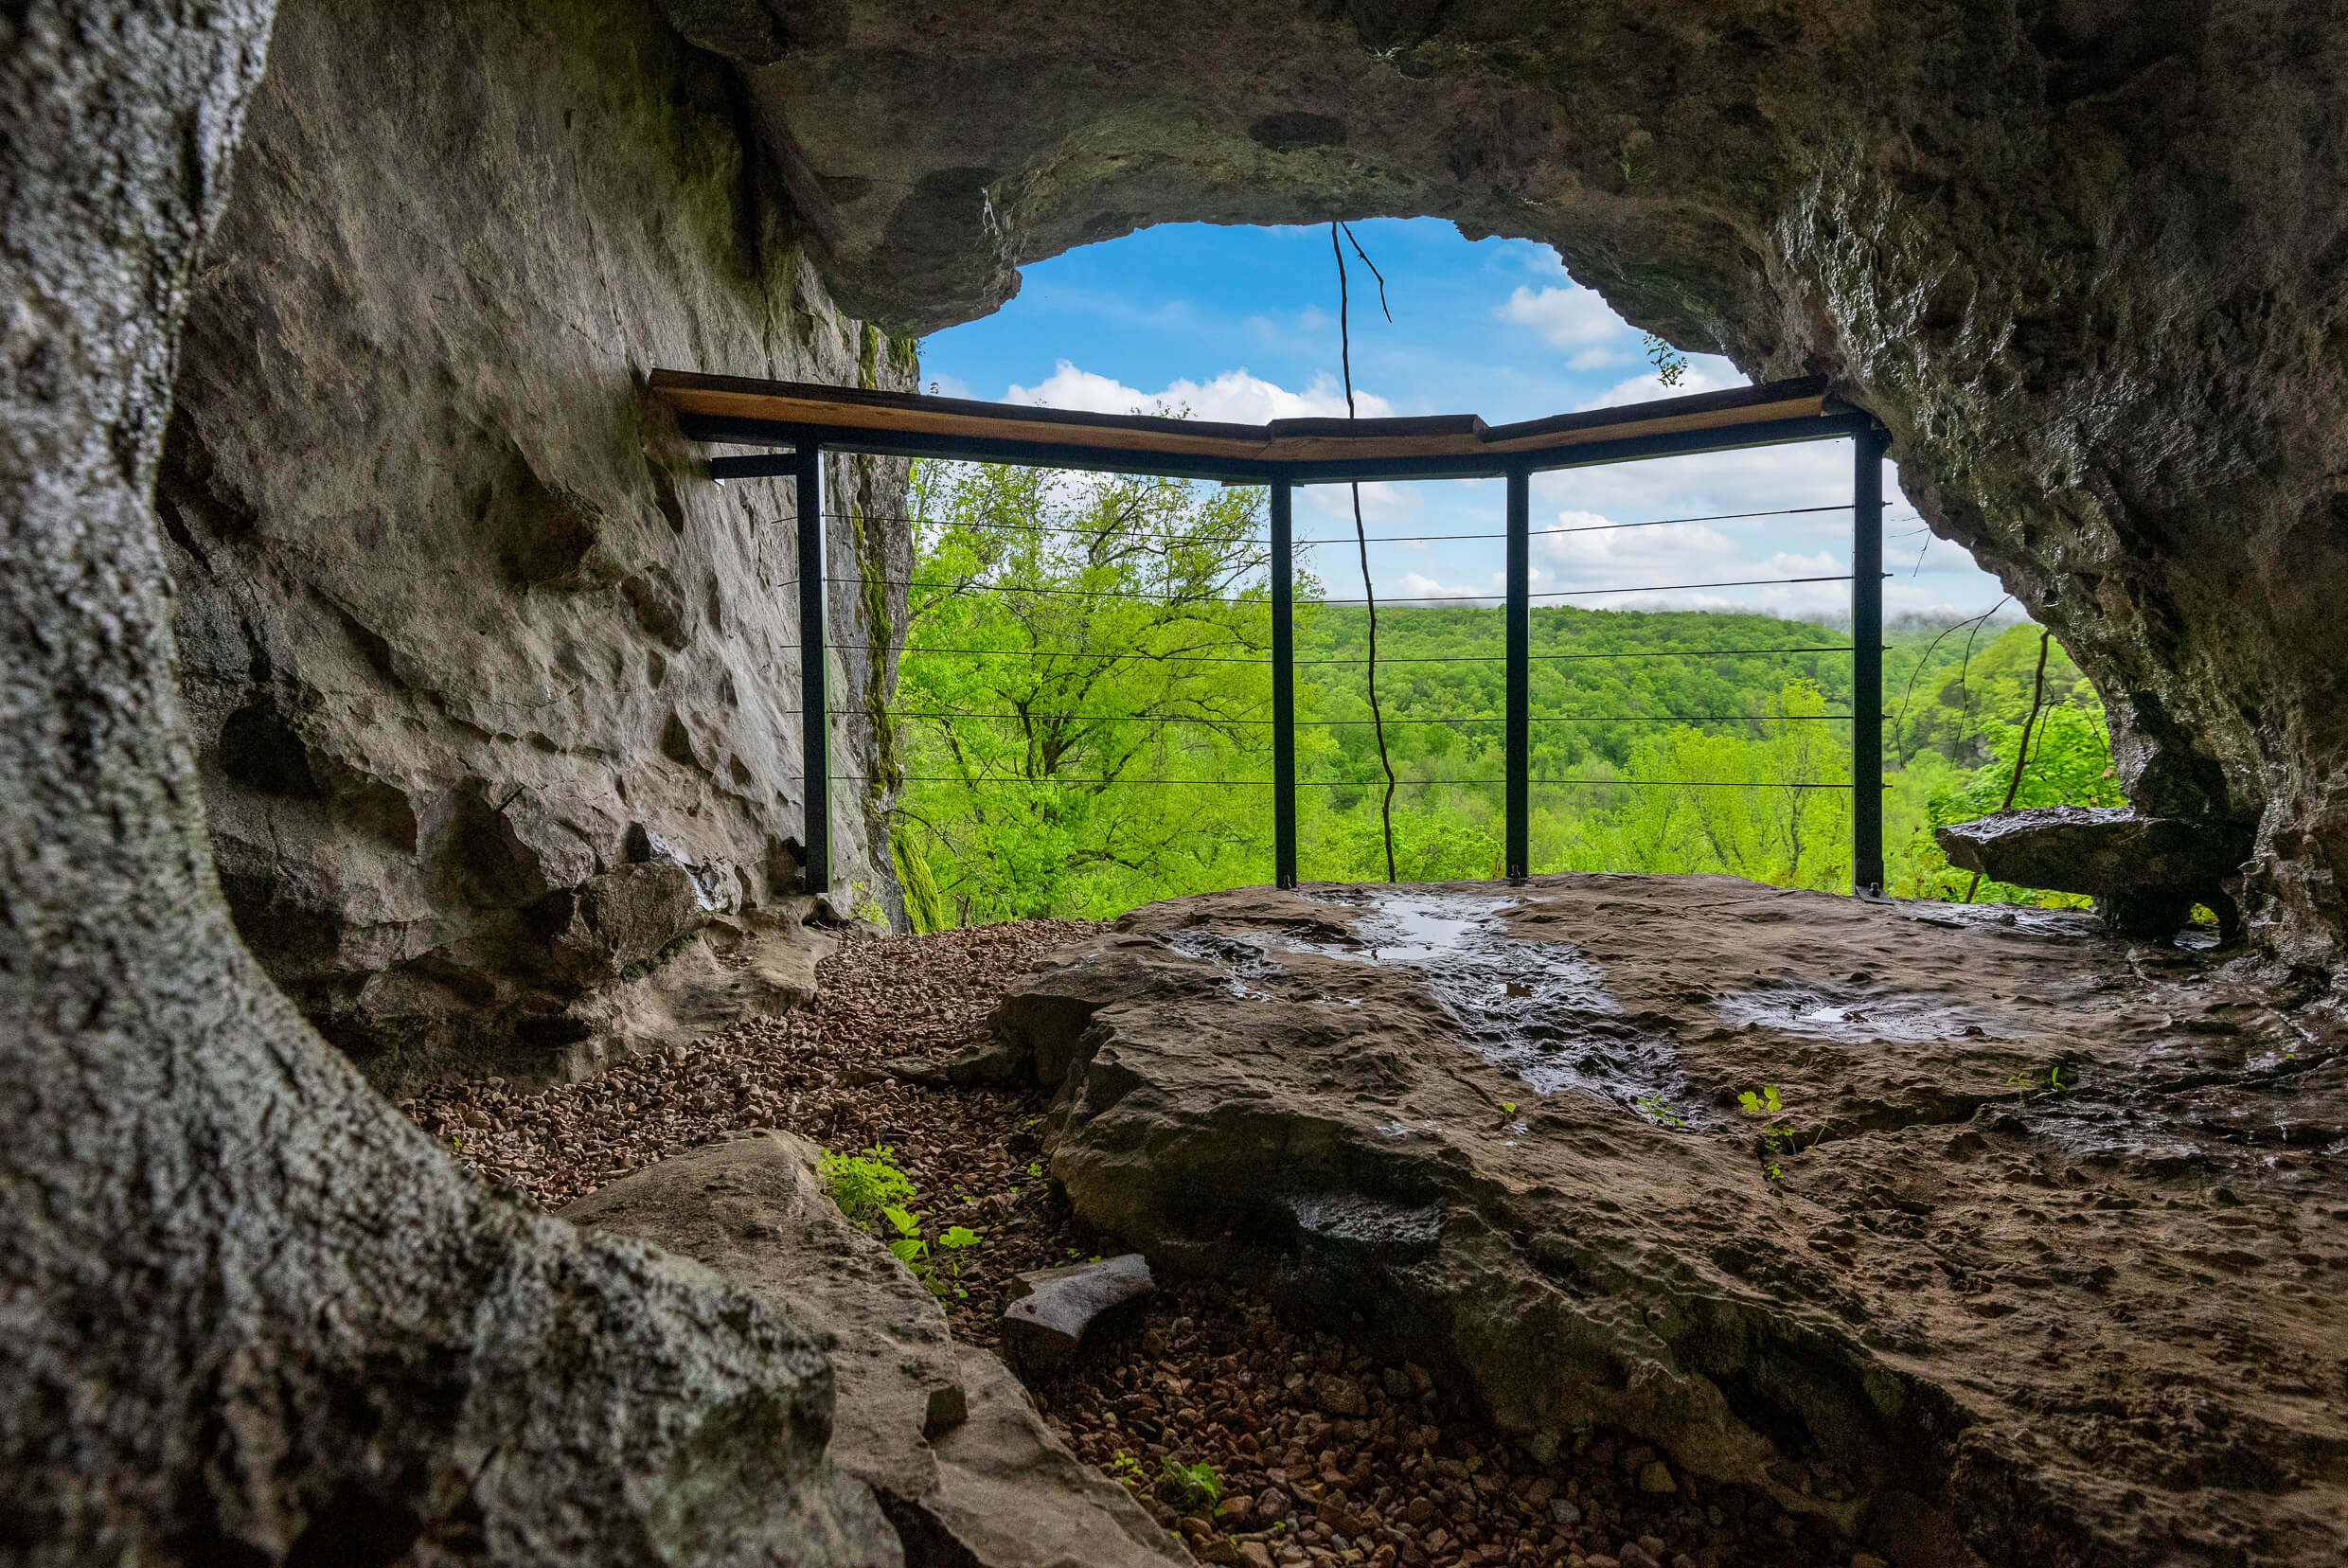 You can rent out this Arkansas cave Arkansas G